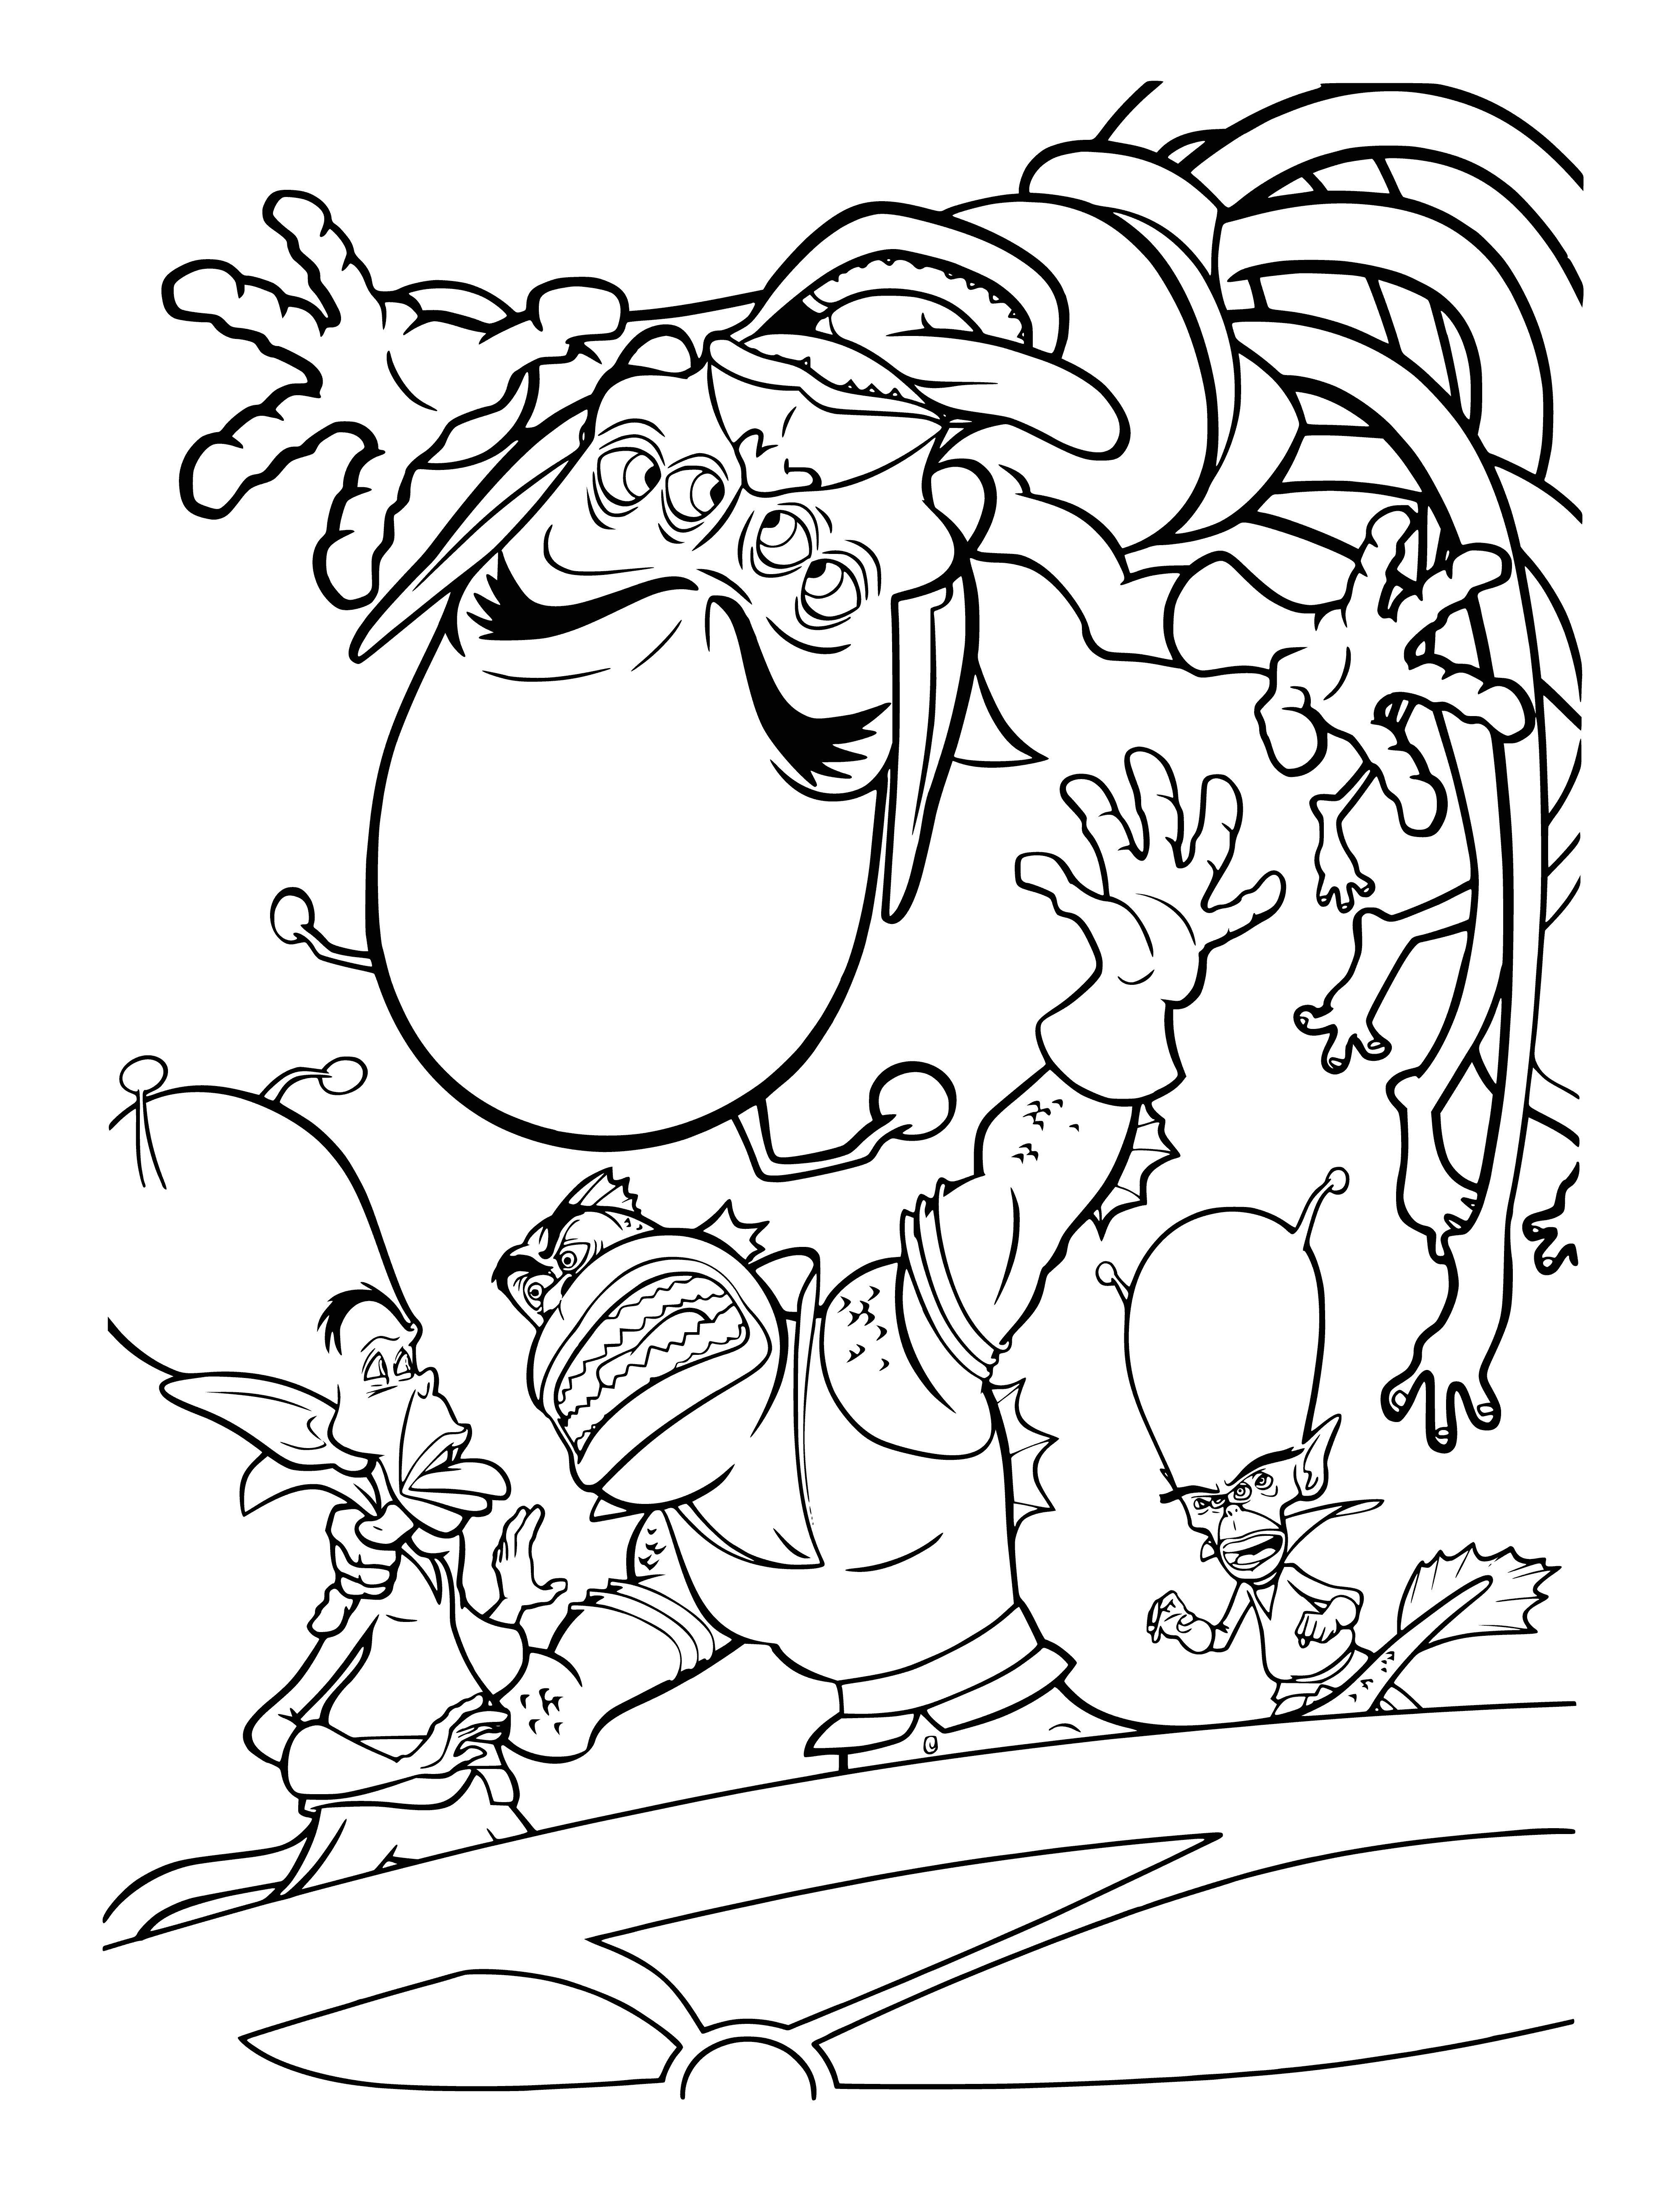 coloring page: Aliens and monsters battle; buildings burning as energy beams shoot from eyes and mouths. People scream, running while monsters punch and kick.